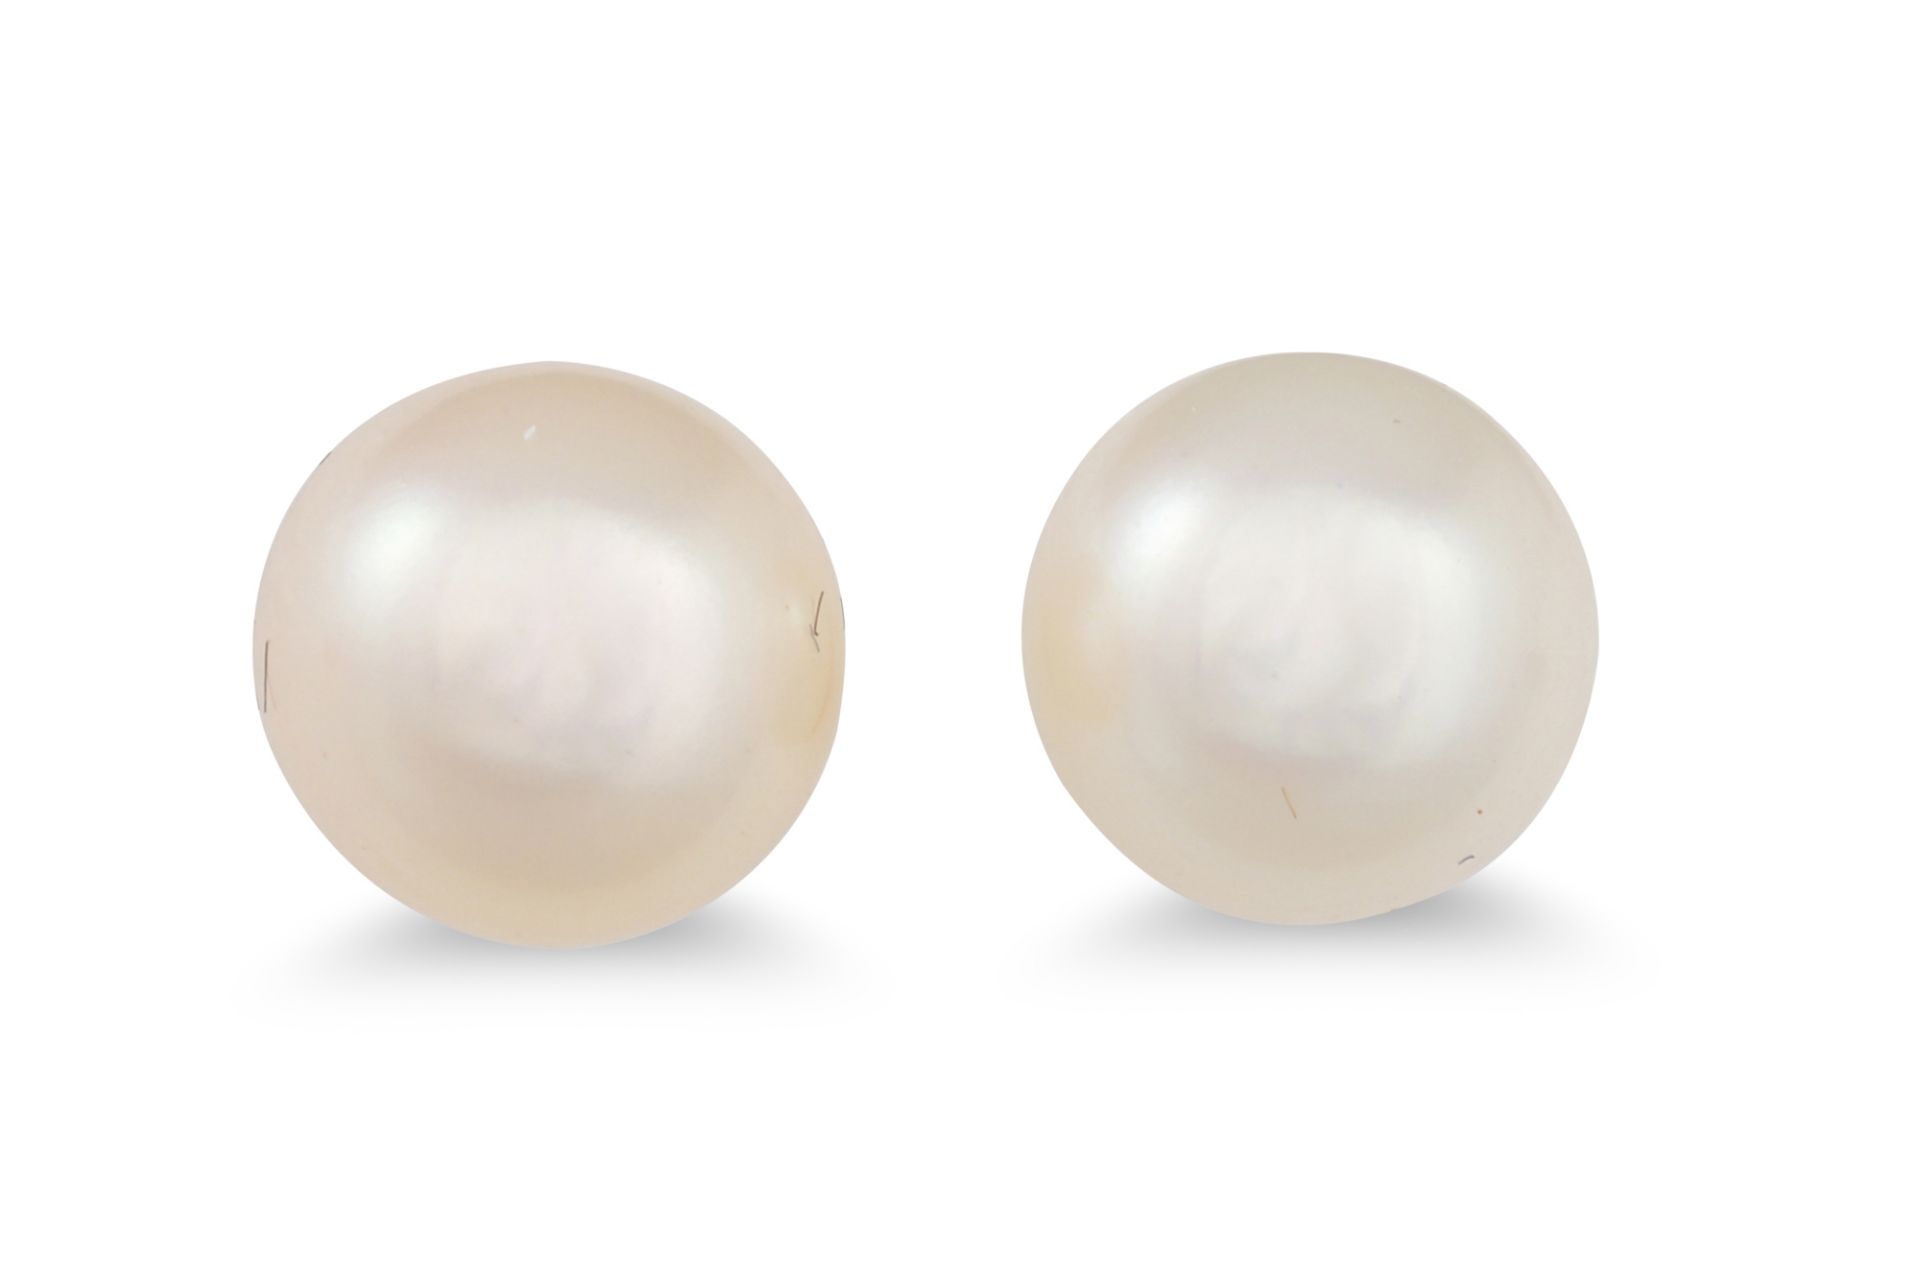 A PAIR OF CULTURED PEARL EARRINGS, cream tones to 9ct gold mounts